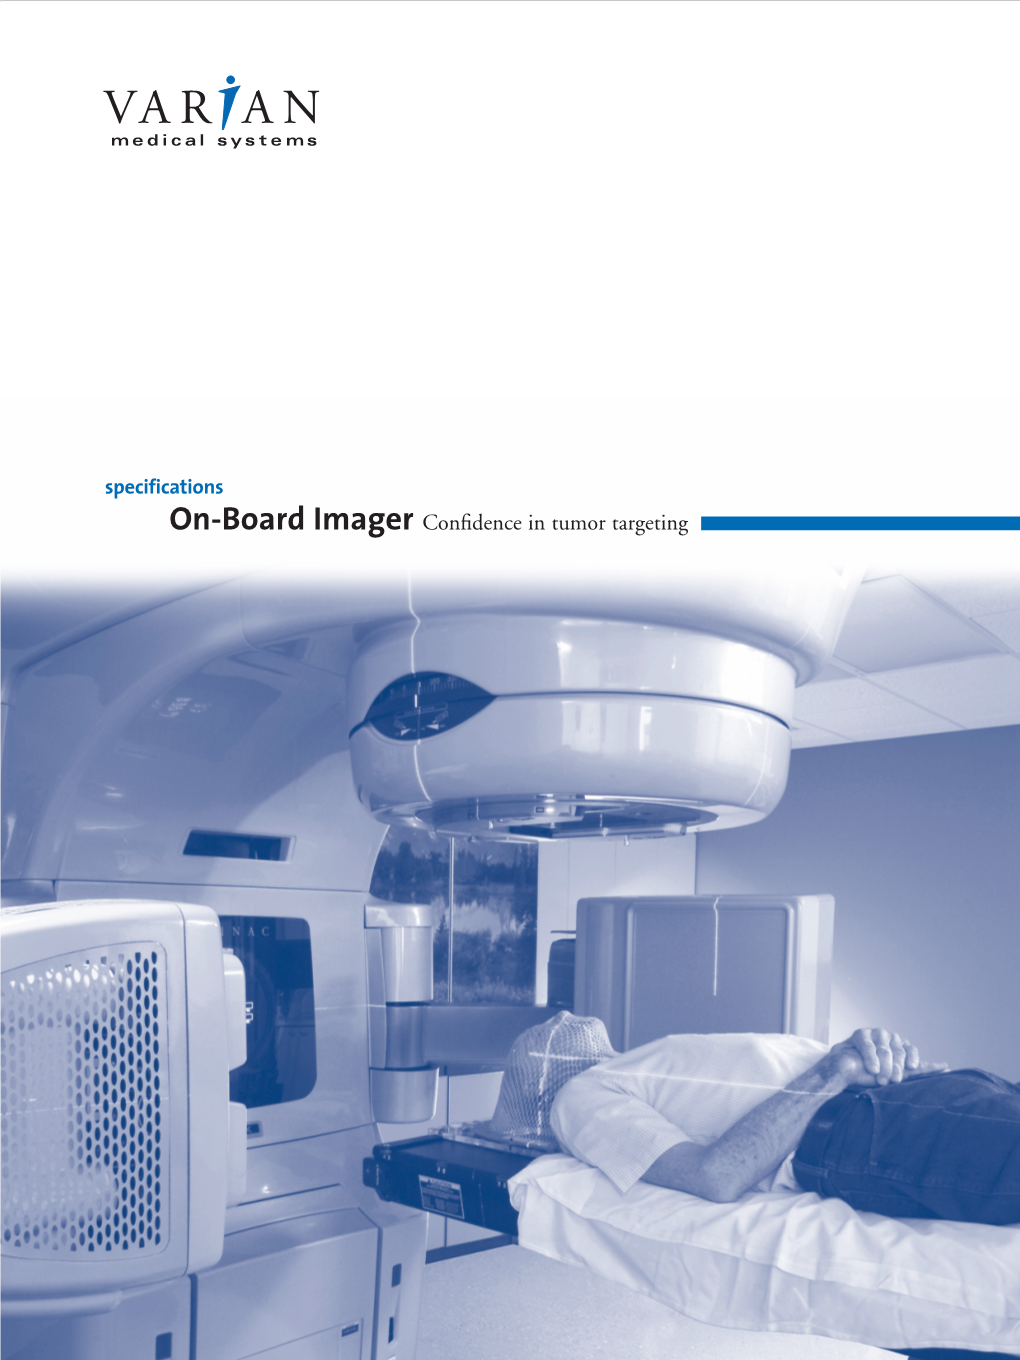 On-Board Imager Conﬁdence in Tumor Targeting